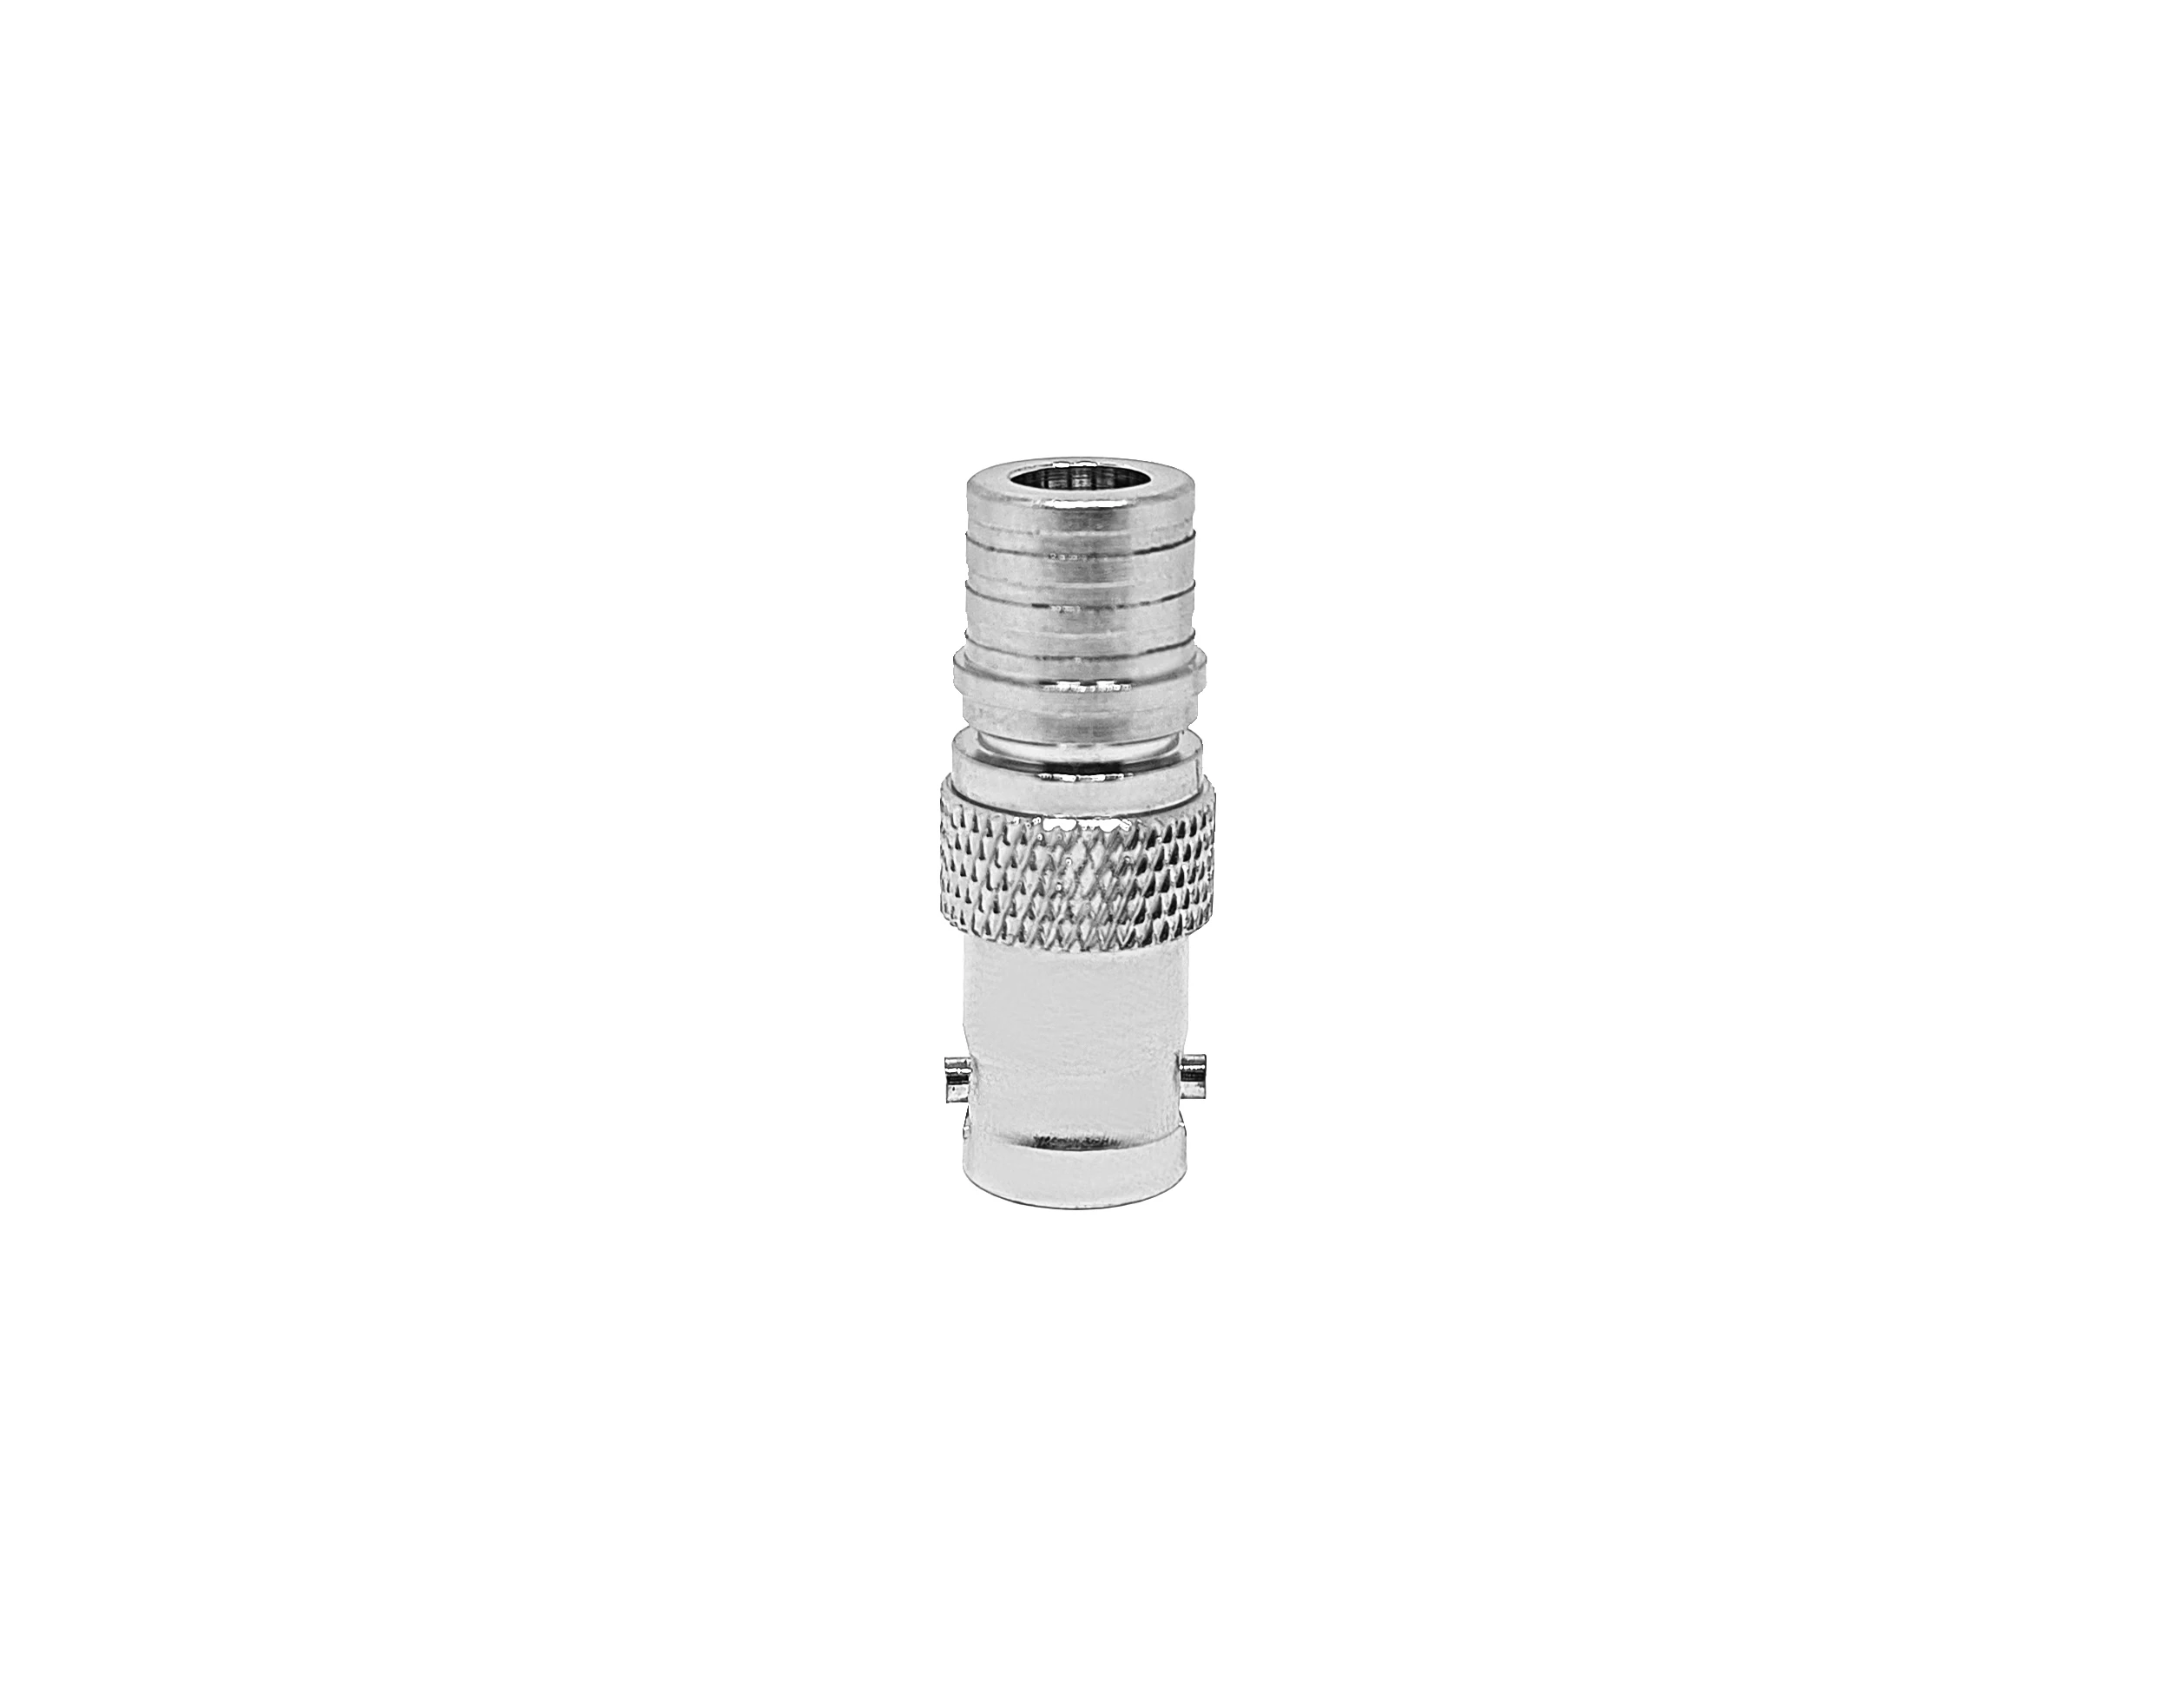 Nickel Plated Adapter BNC Connector female To QMA Male Adapter manufacture